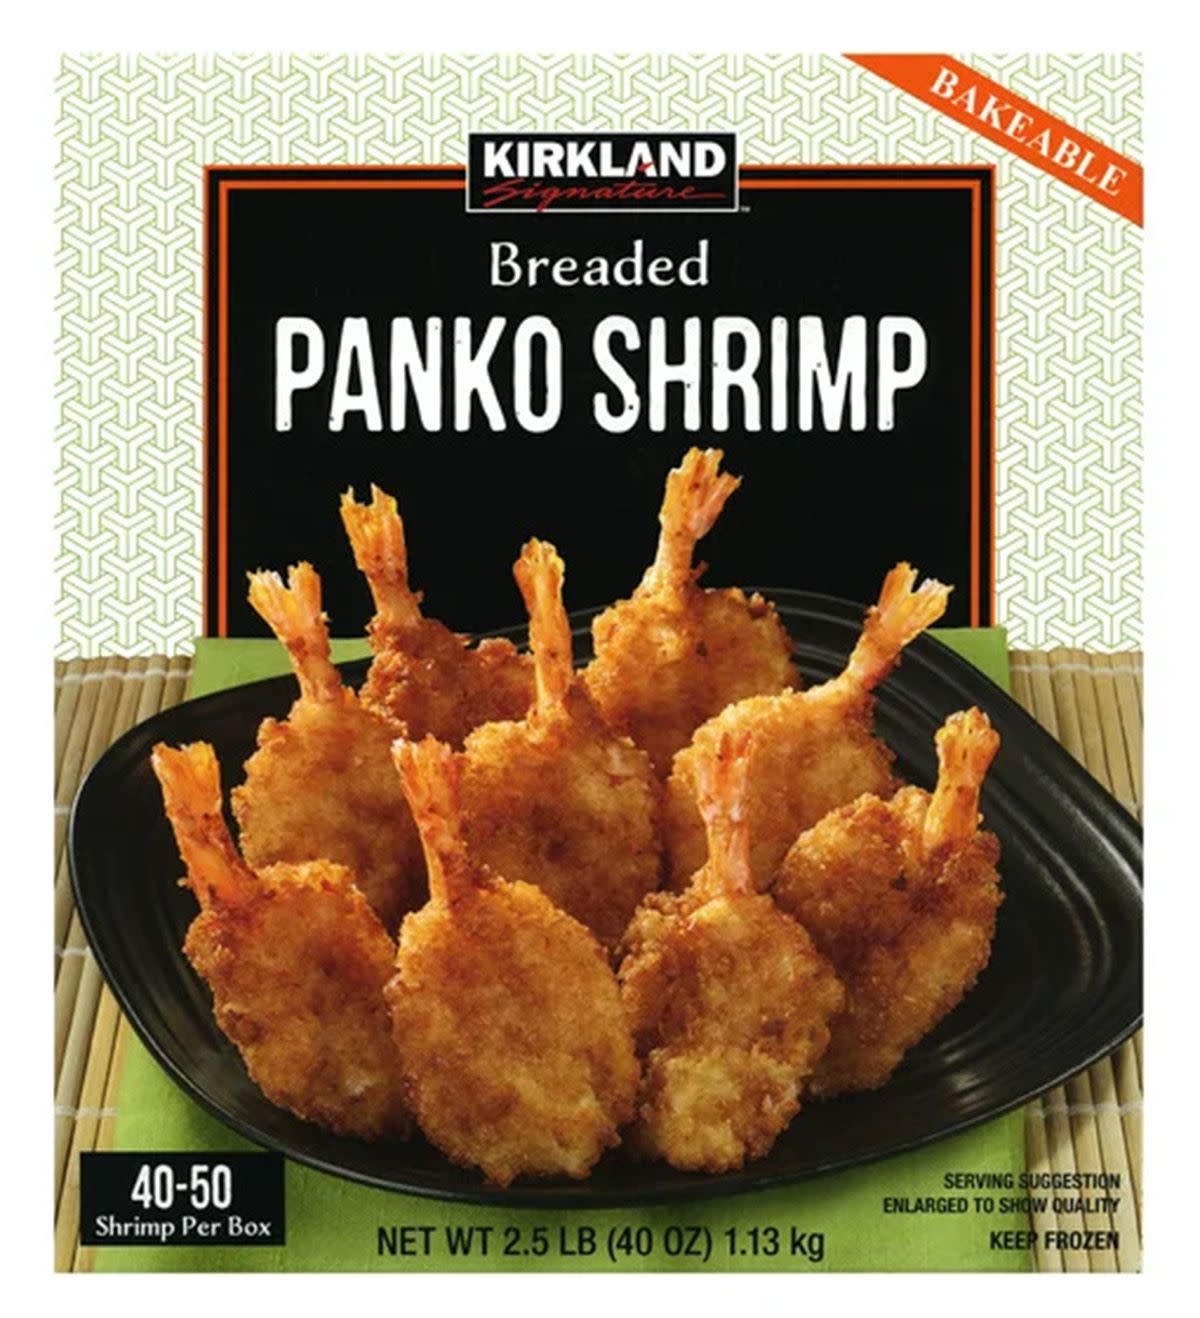 A package of Costco's panko shrimp against a white background